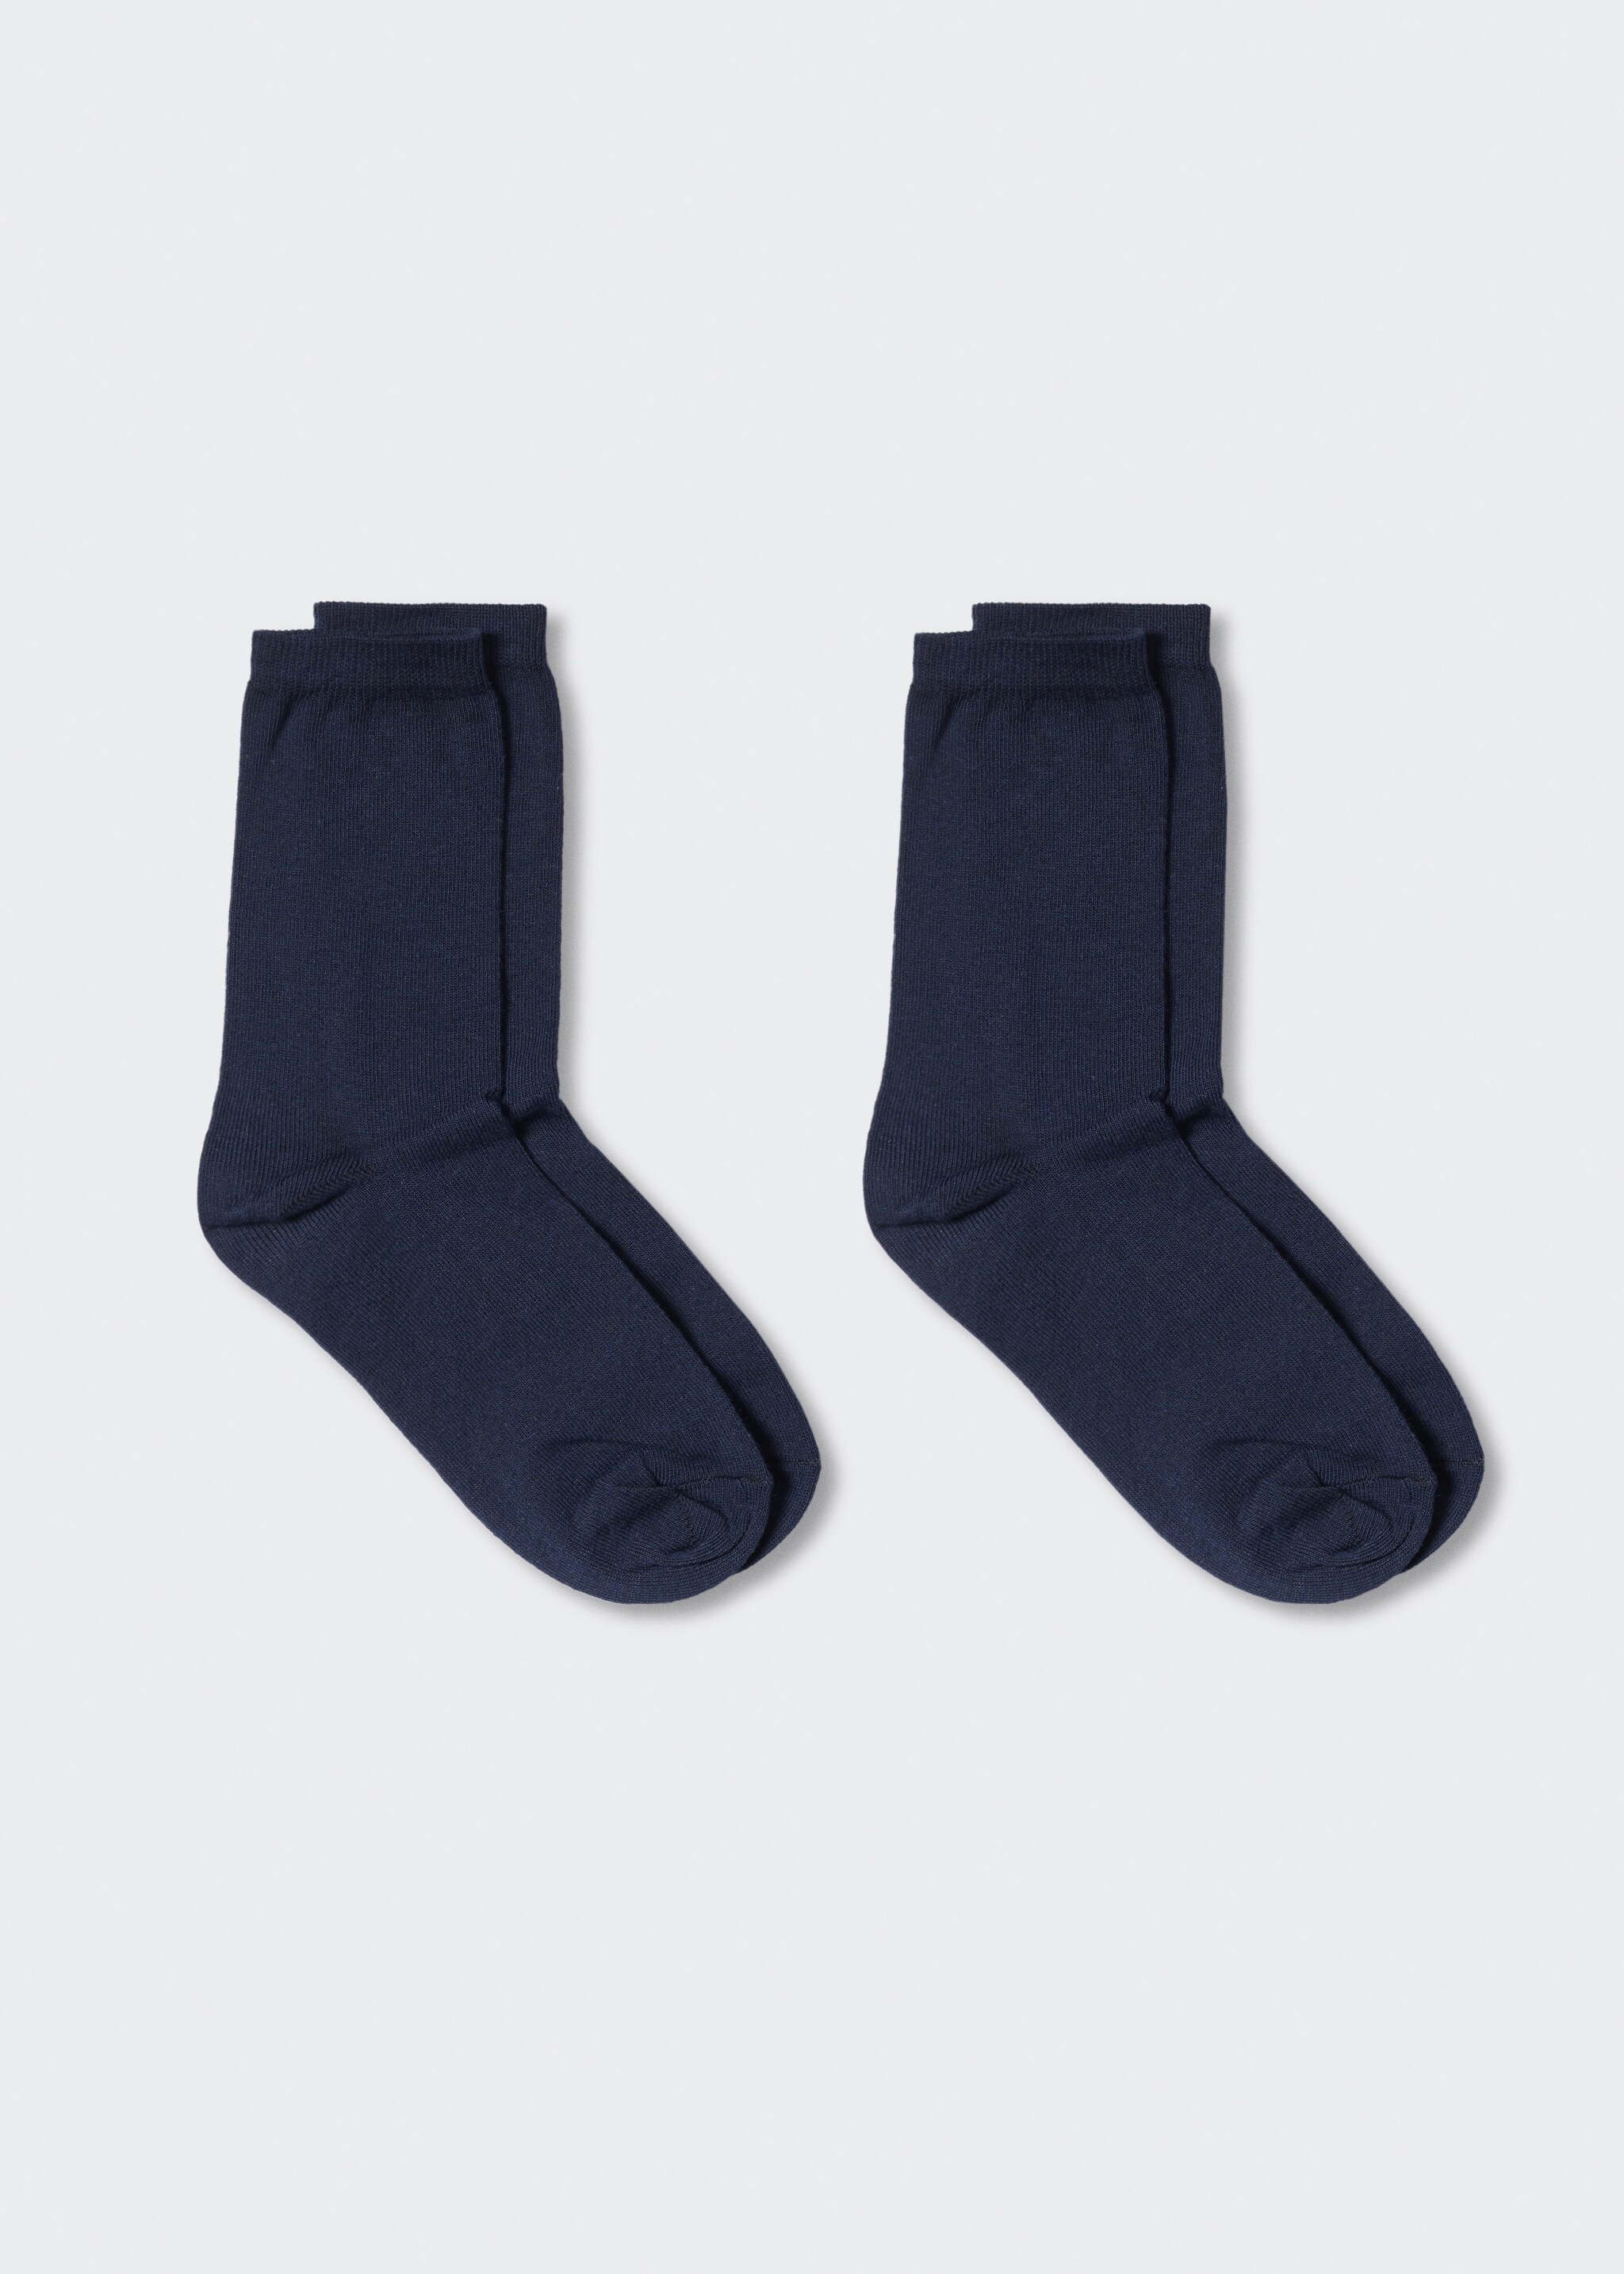 2 pack plain socks - Article without model